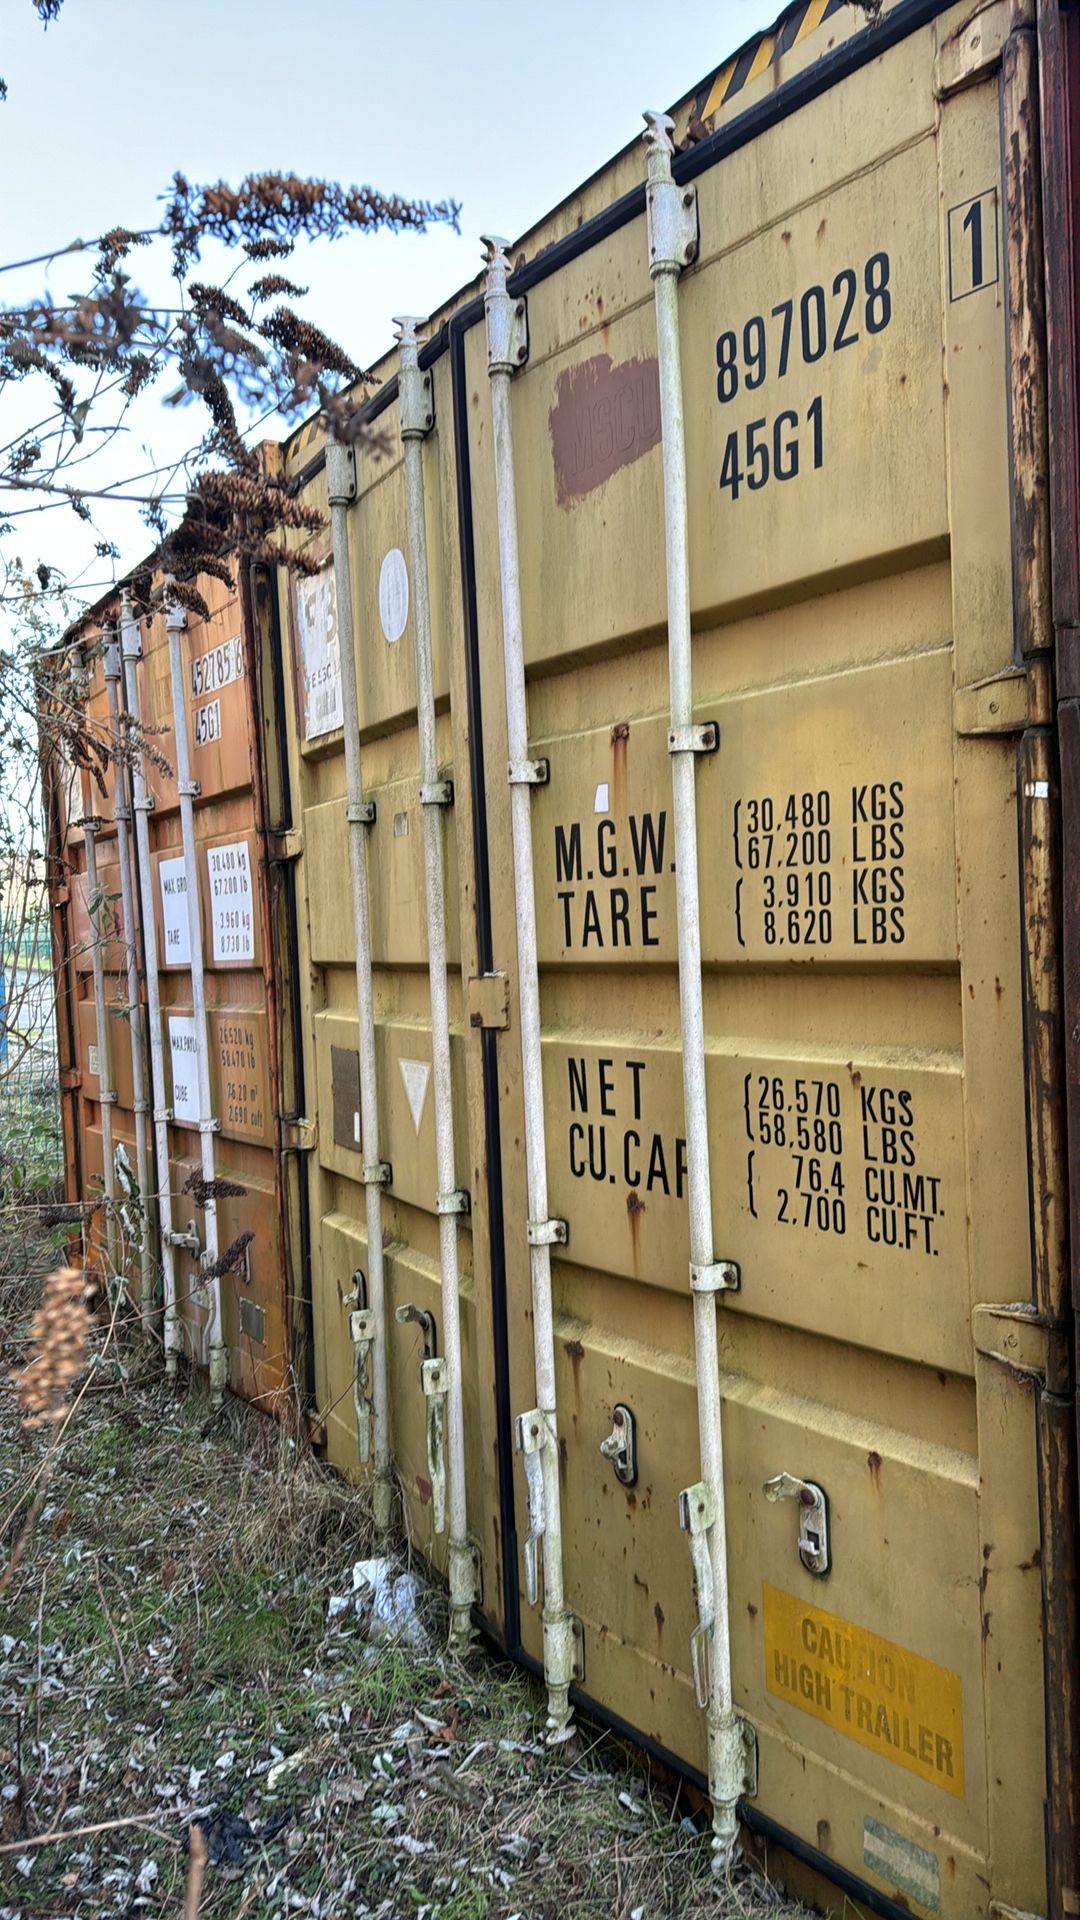 Shipping Container - 19 (89702845G1)